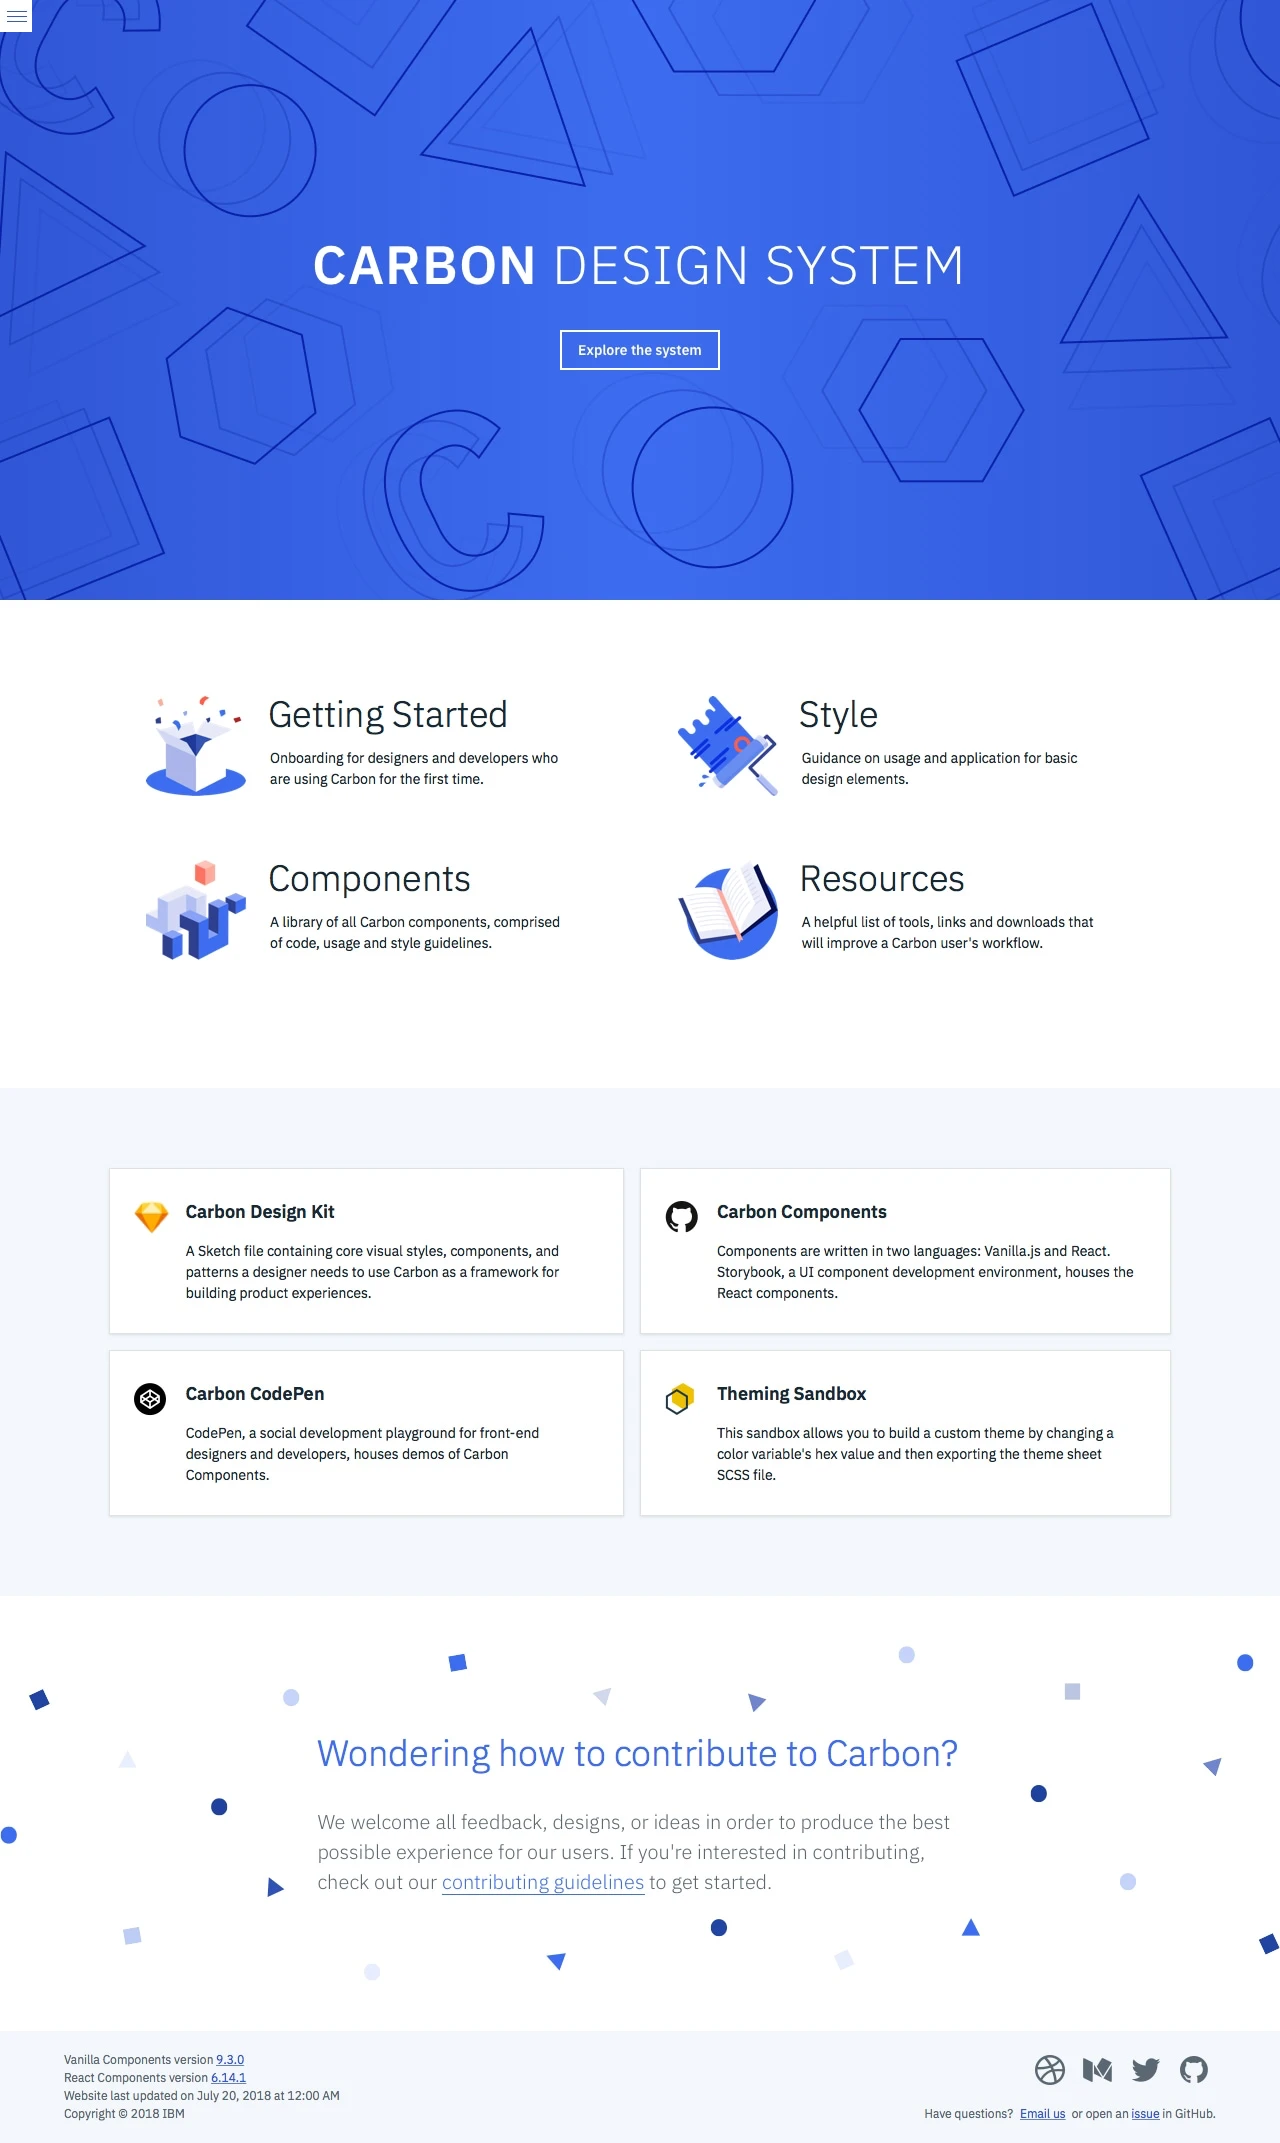 Carbon Design System Landing Page Example: Carbon is the design system for IBM Cloud products. It is a series of individual styles, components, and guidelines used for creating unified UI.